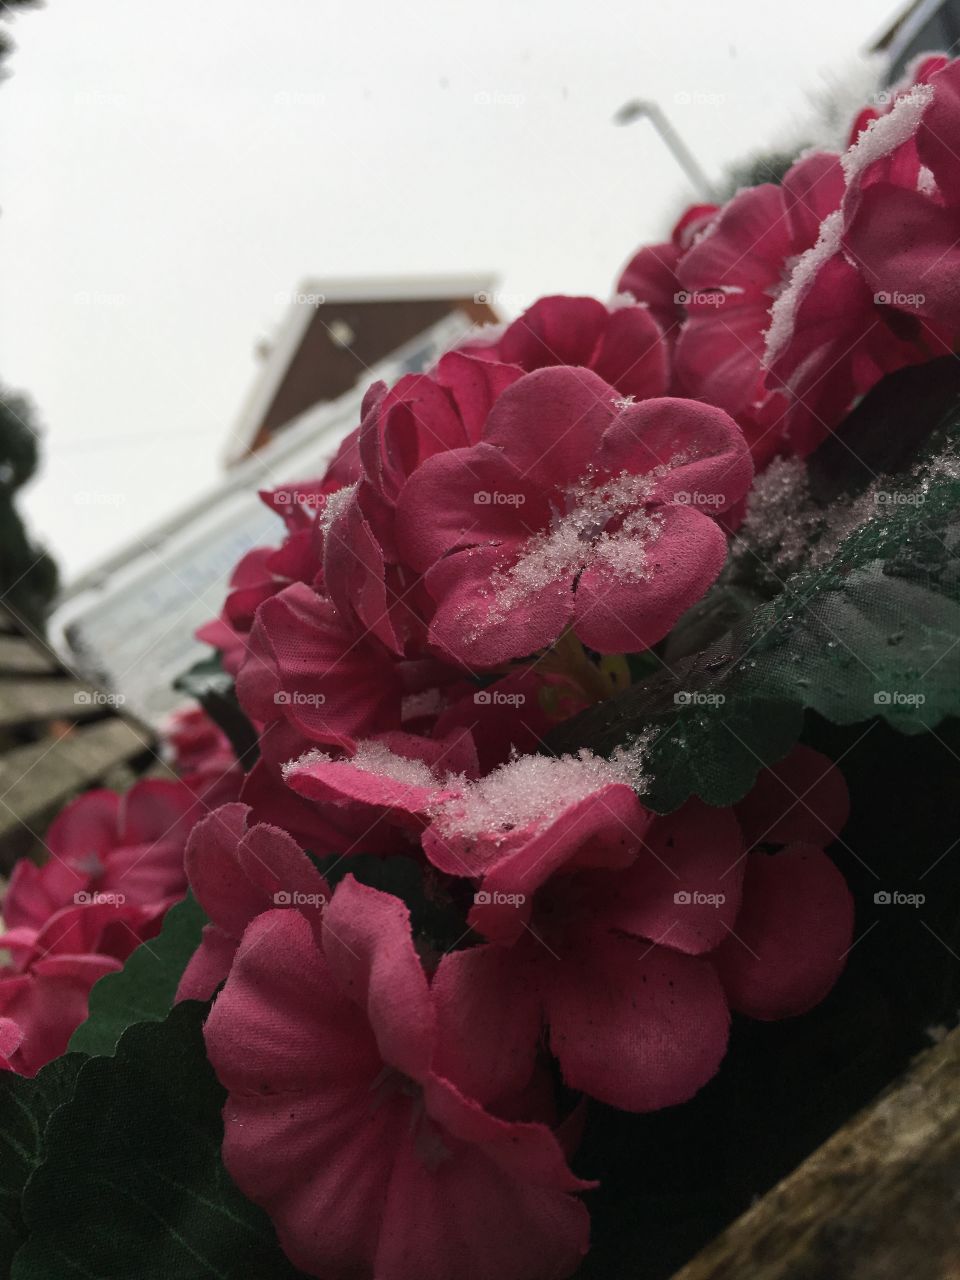 Photo I took of the flowers in my garden with a few drops of snow on them! Looks really nice as a wallpaper or some kind of business card for gardening ! Really good looking photo ! Hope to sell xD